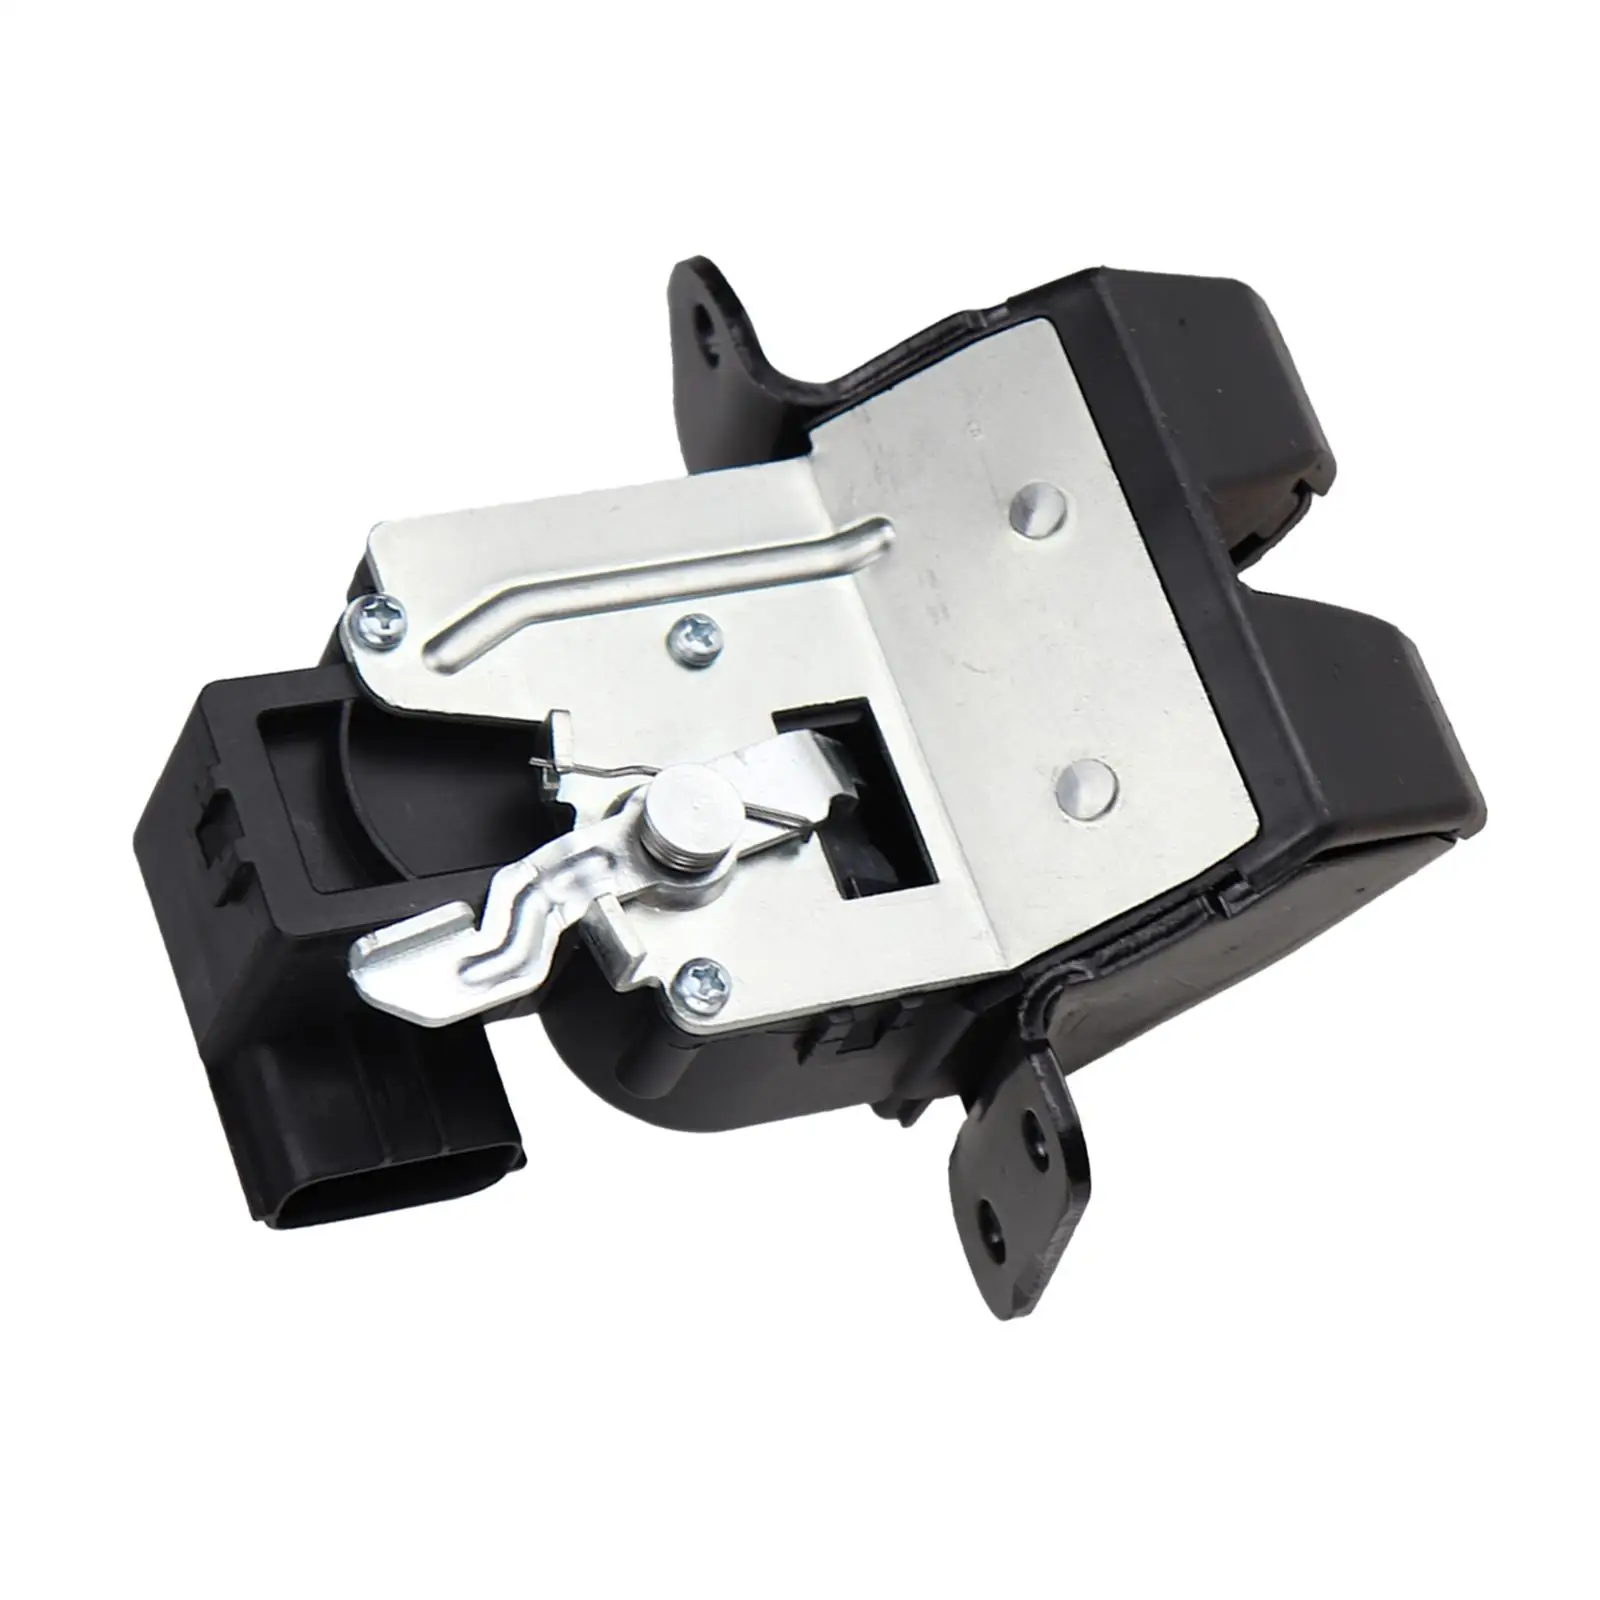 Tail Gate Latch Lock for GT i30 Easy to Install Replace